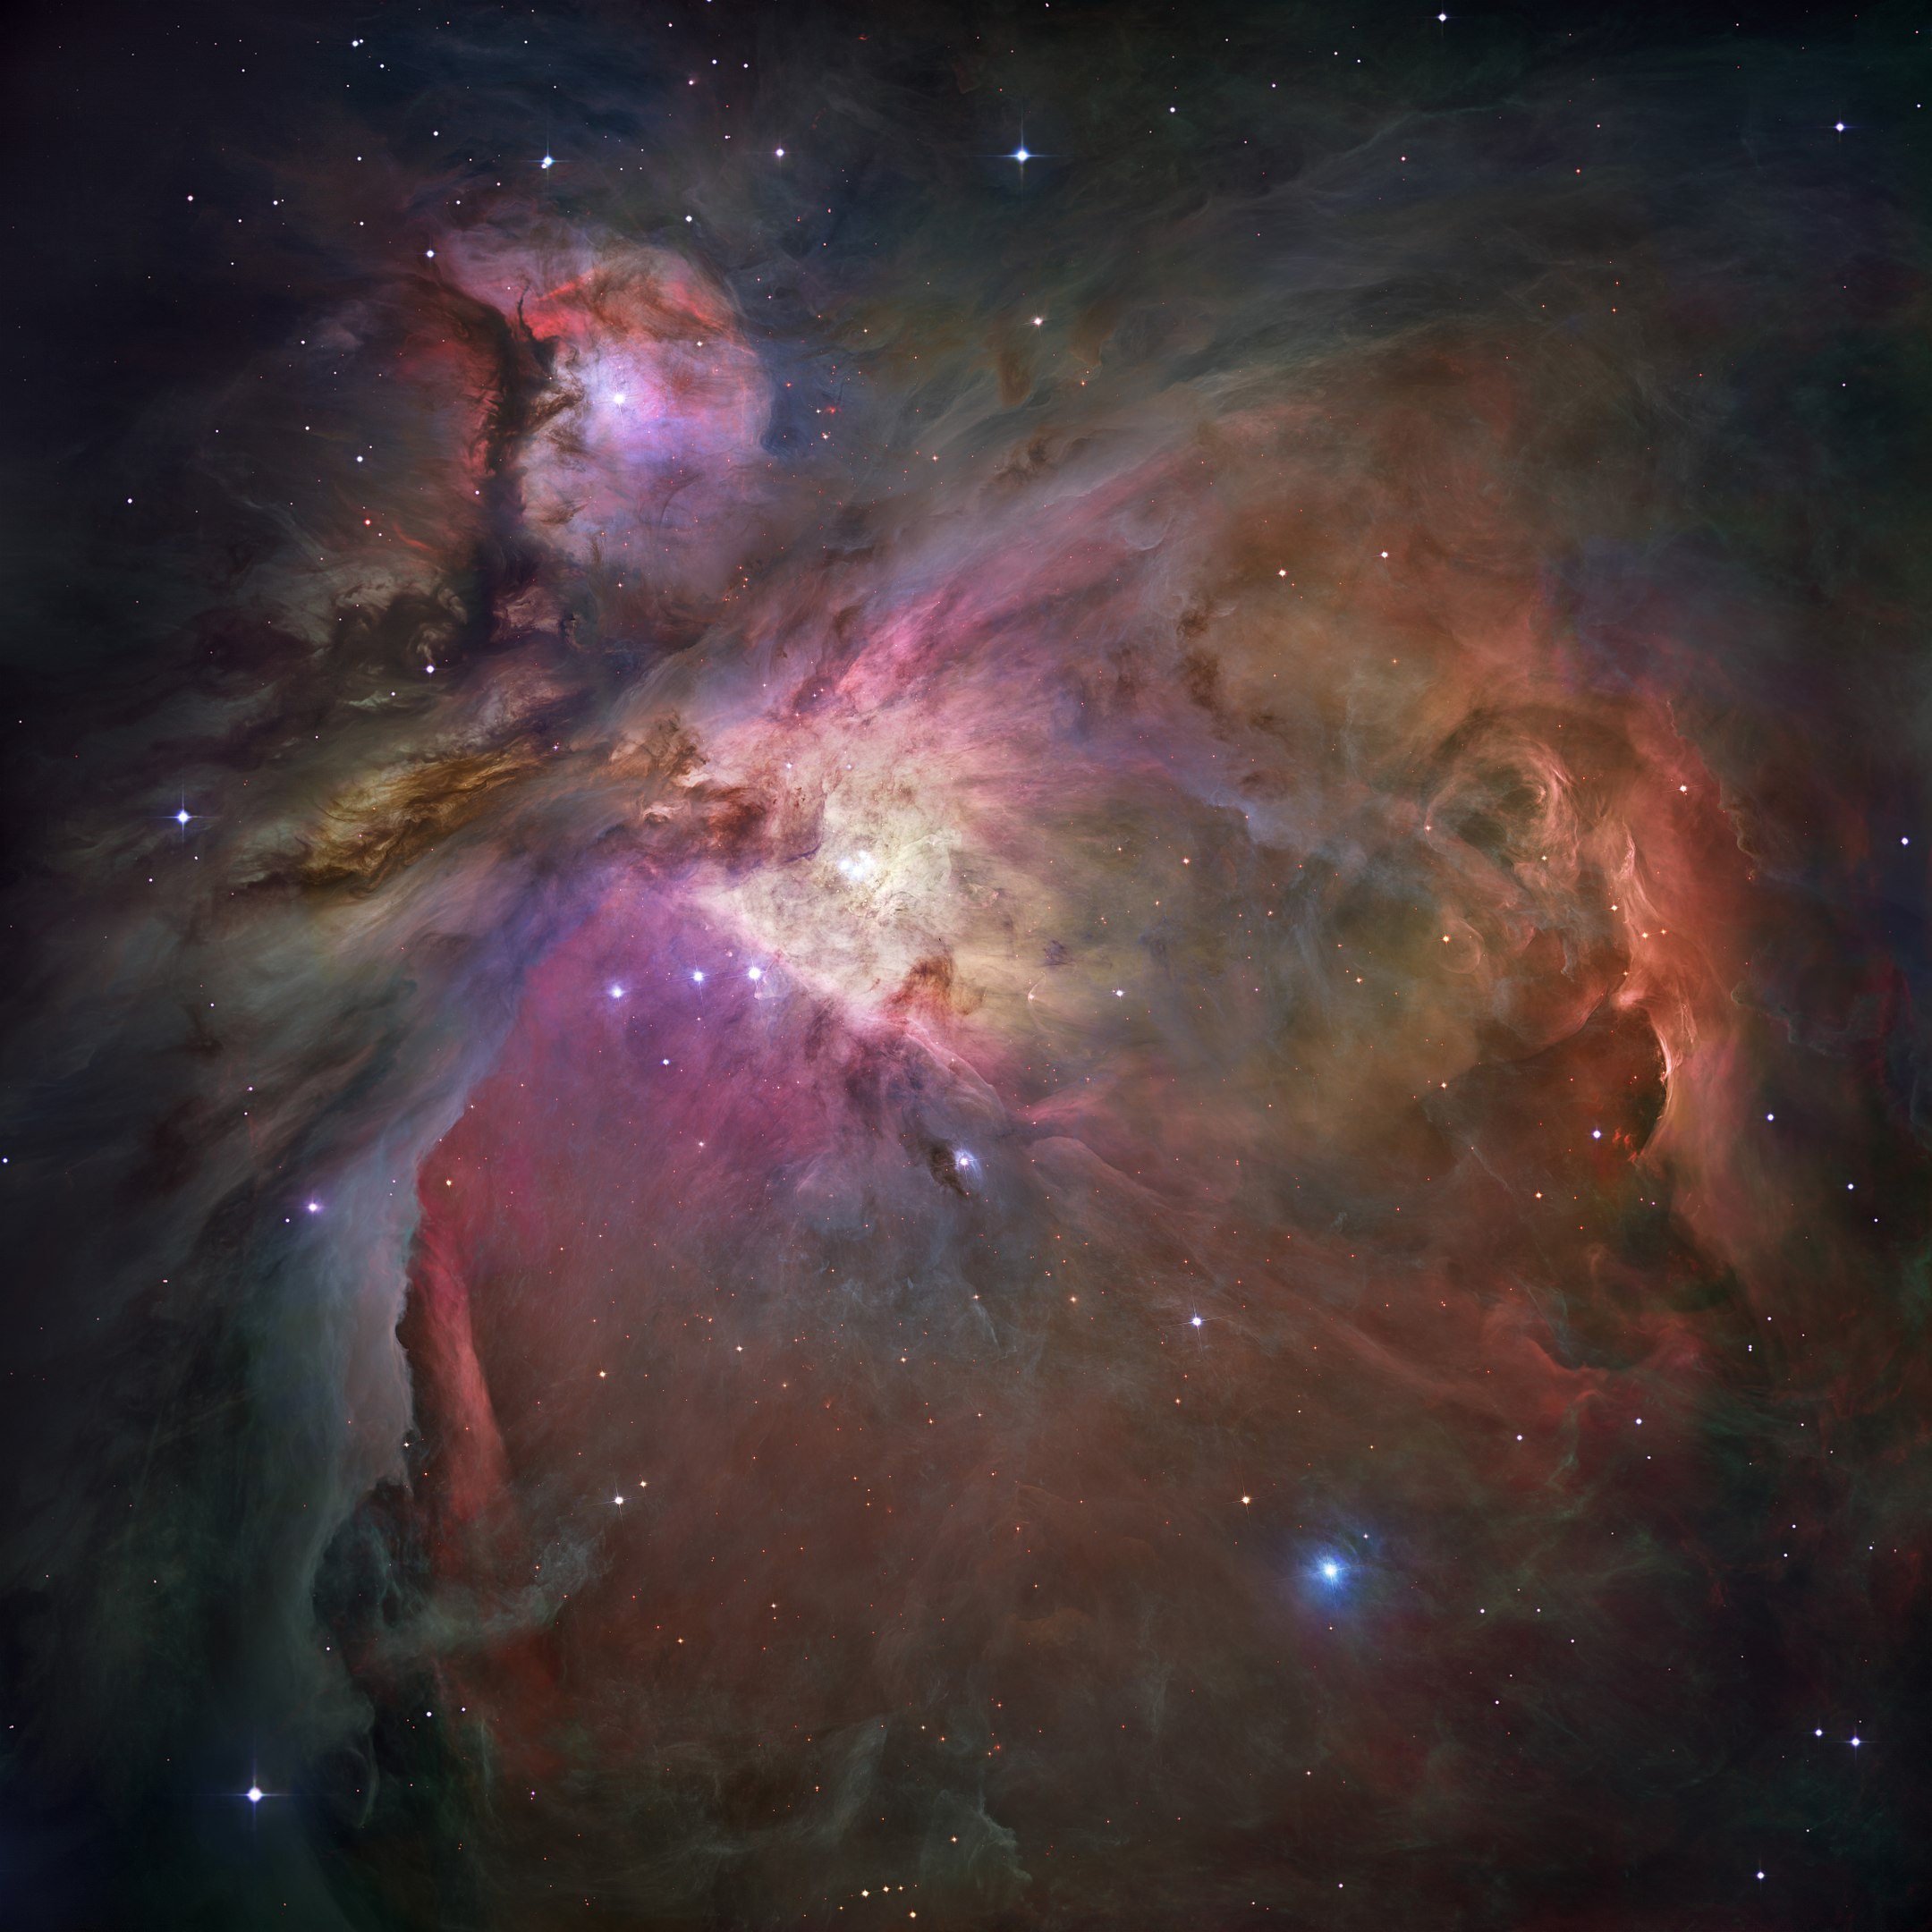 A mosaic of the Orion Nebula, taken by the Hubble Telescope.